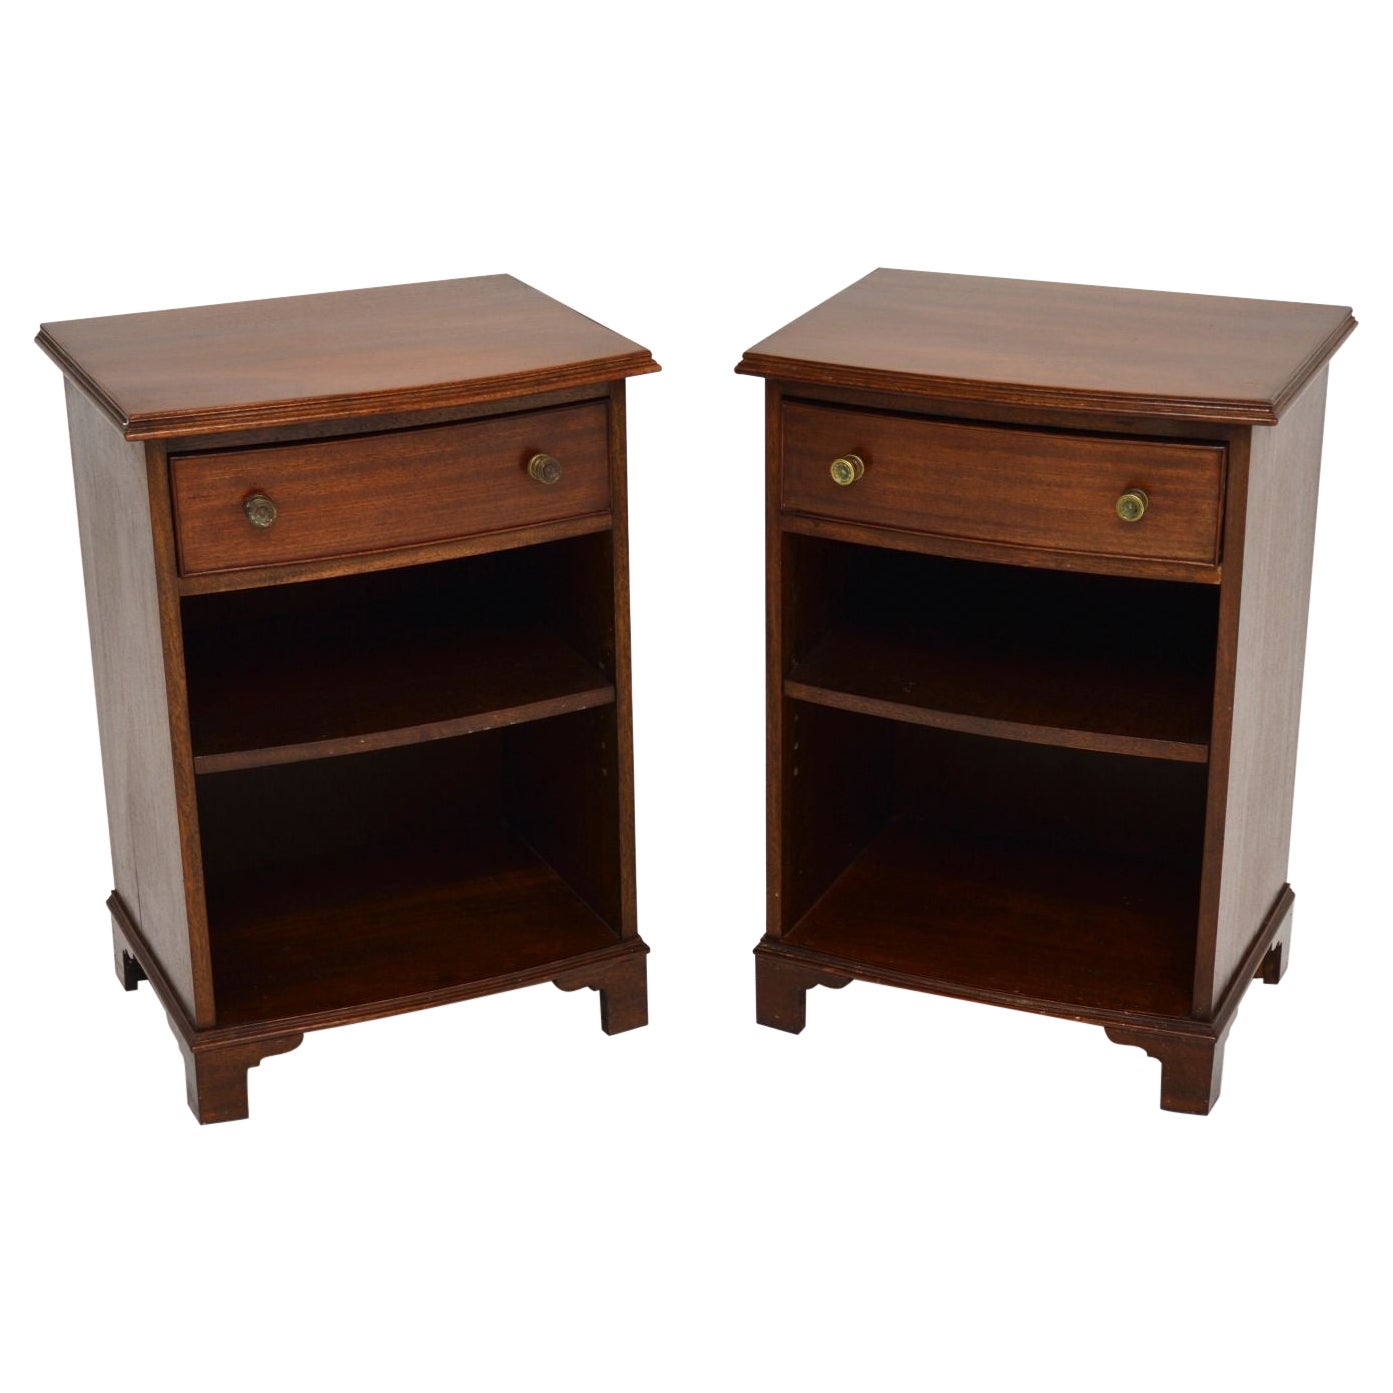 Pair of Antique Edwardian Bedside Cabinets